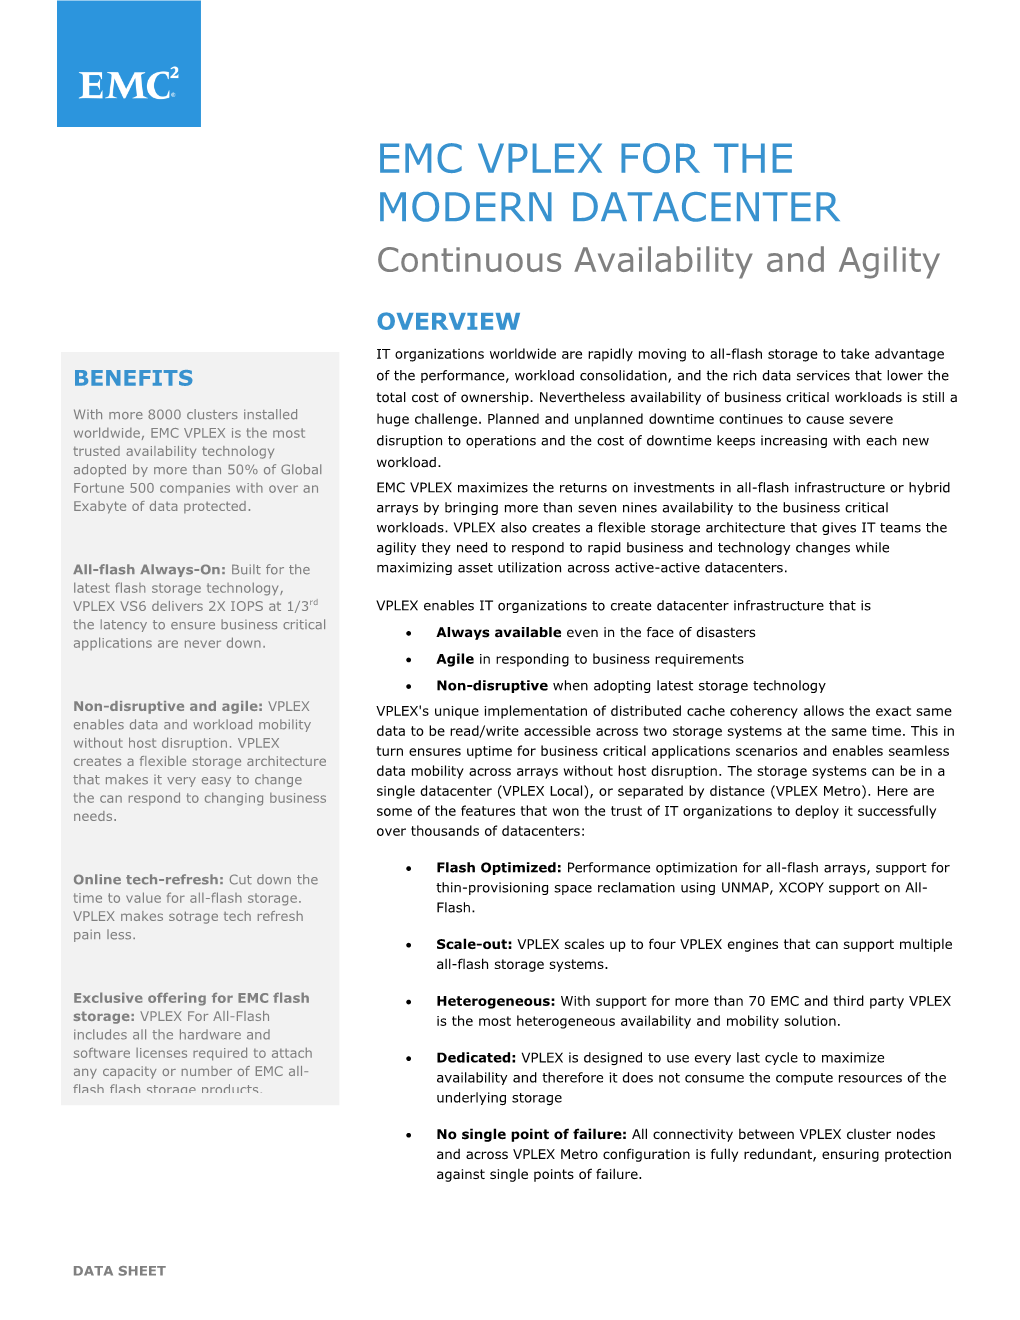 EMC VPLEX for the MODERN DATACENTER Continuous Availability and Agility